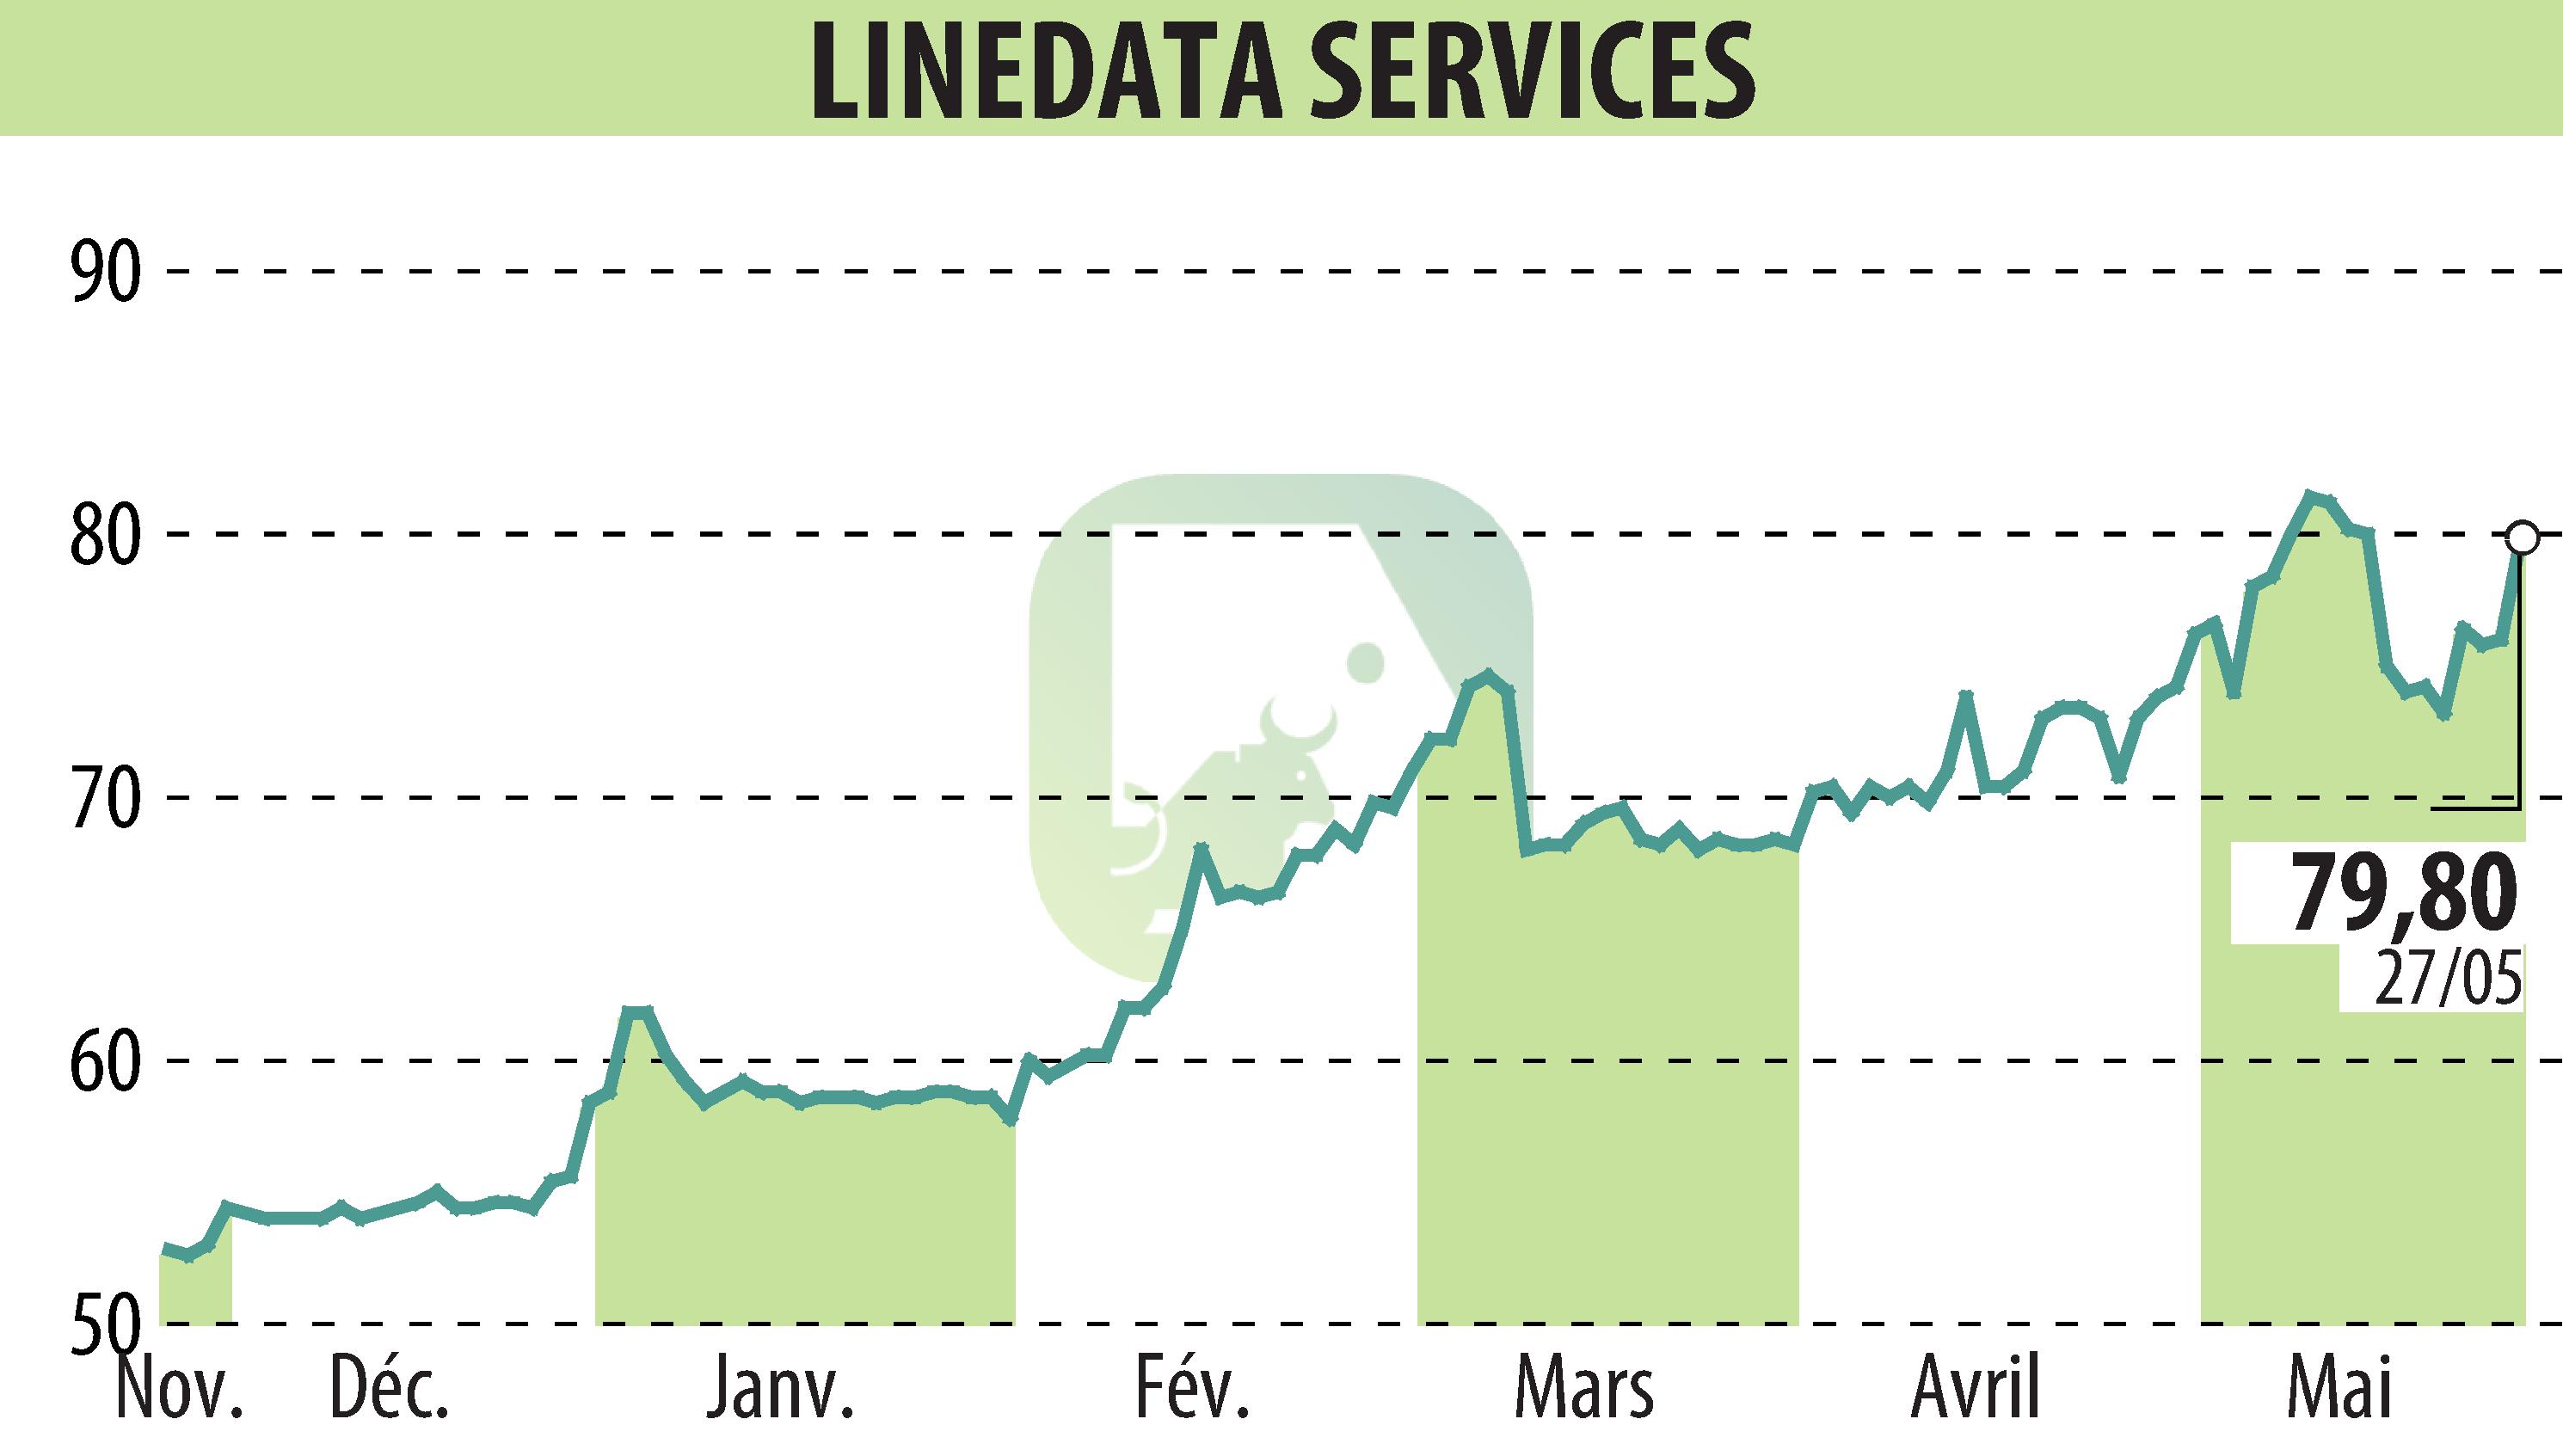 Stock price chart of LINEDATA SERVICES (EPA:LIN) showing fluctuations.